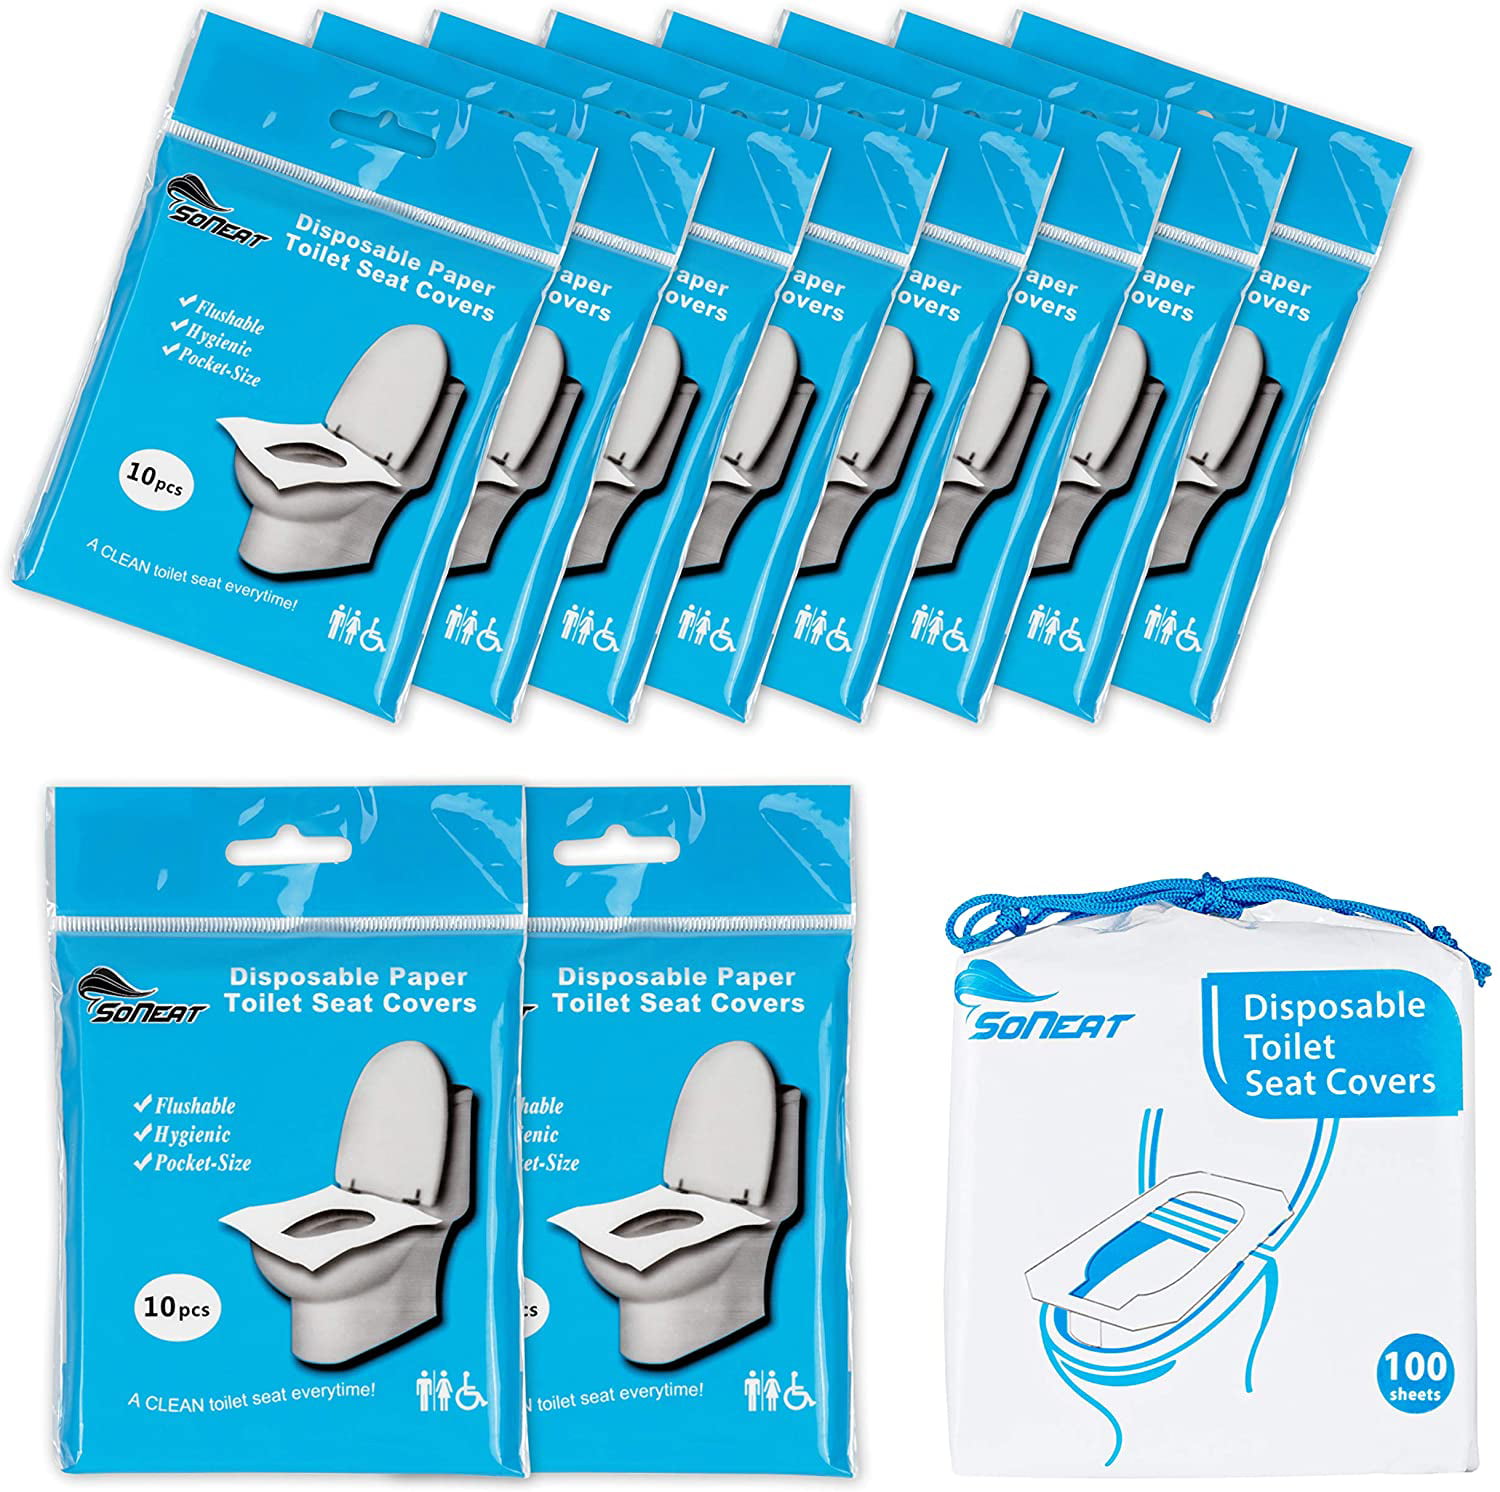 Toilet Seat Covers Disposable Travel Pack of Disposable Toilet Seat Covers Flushable - XL for Adults and Kids Potty Training Travel Essential Convenient 100-Pack 